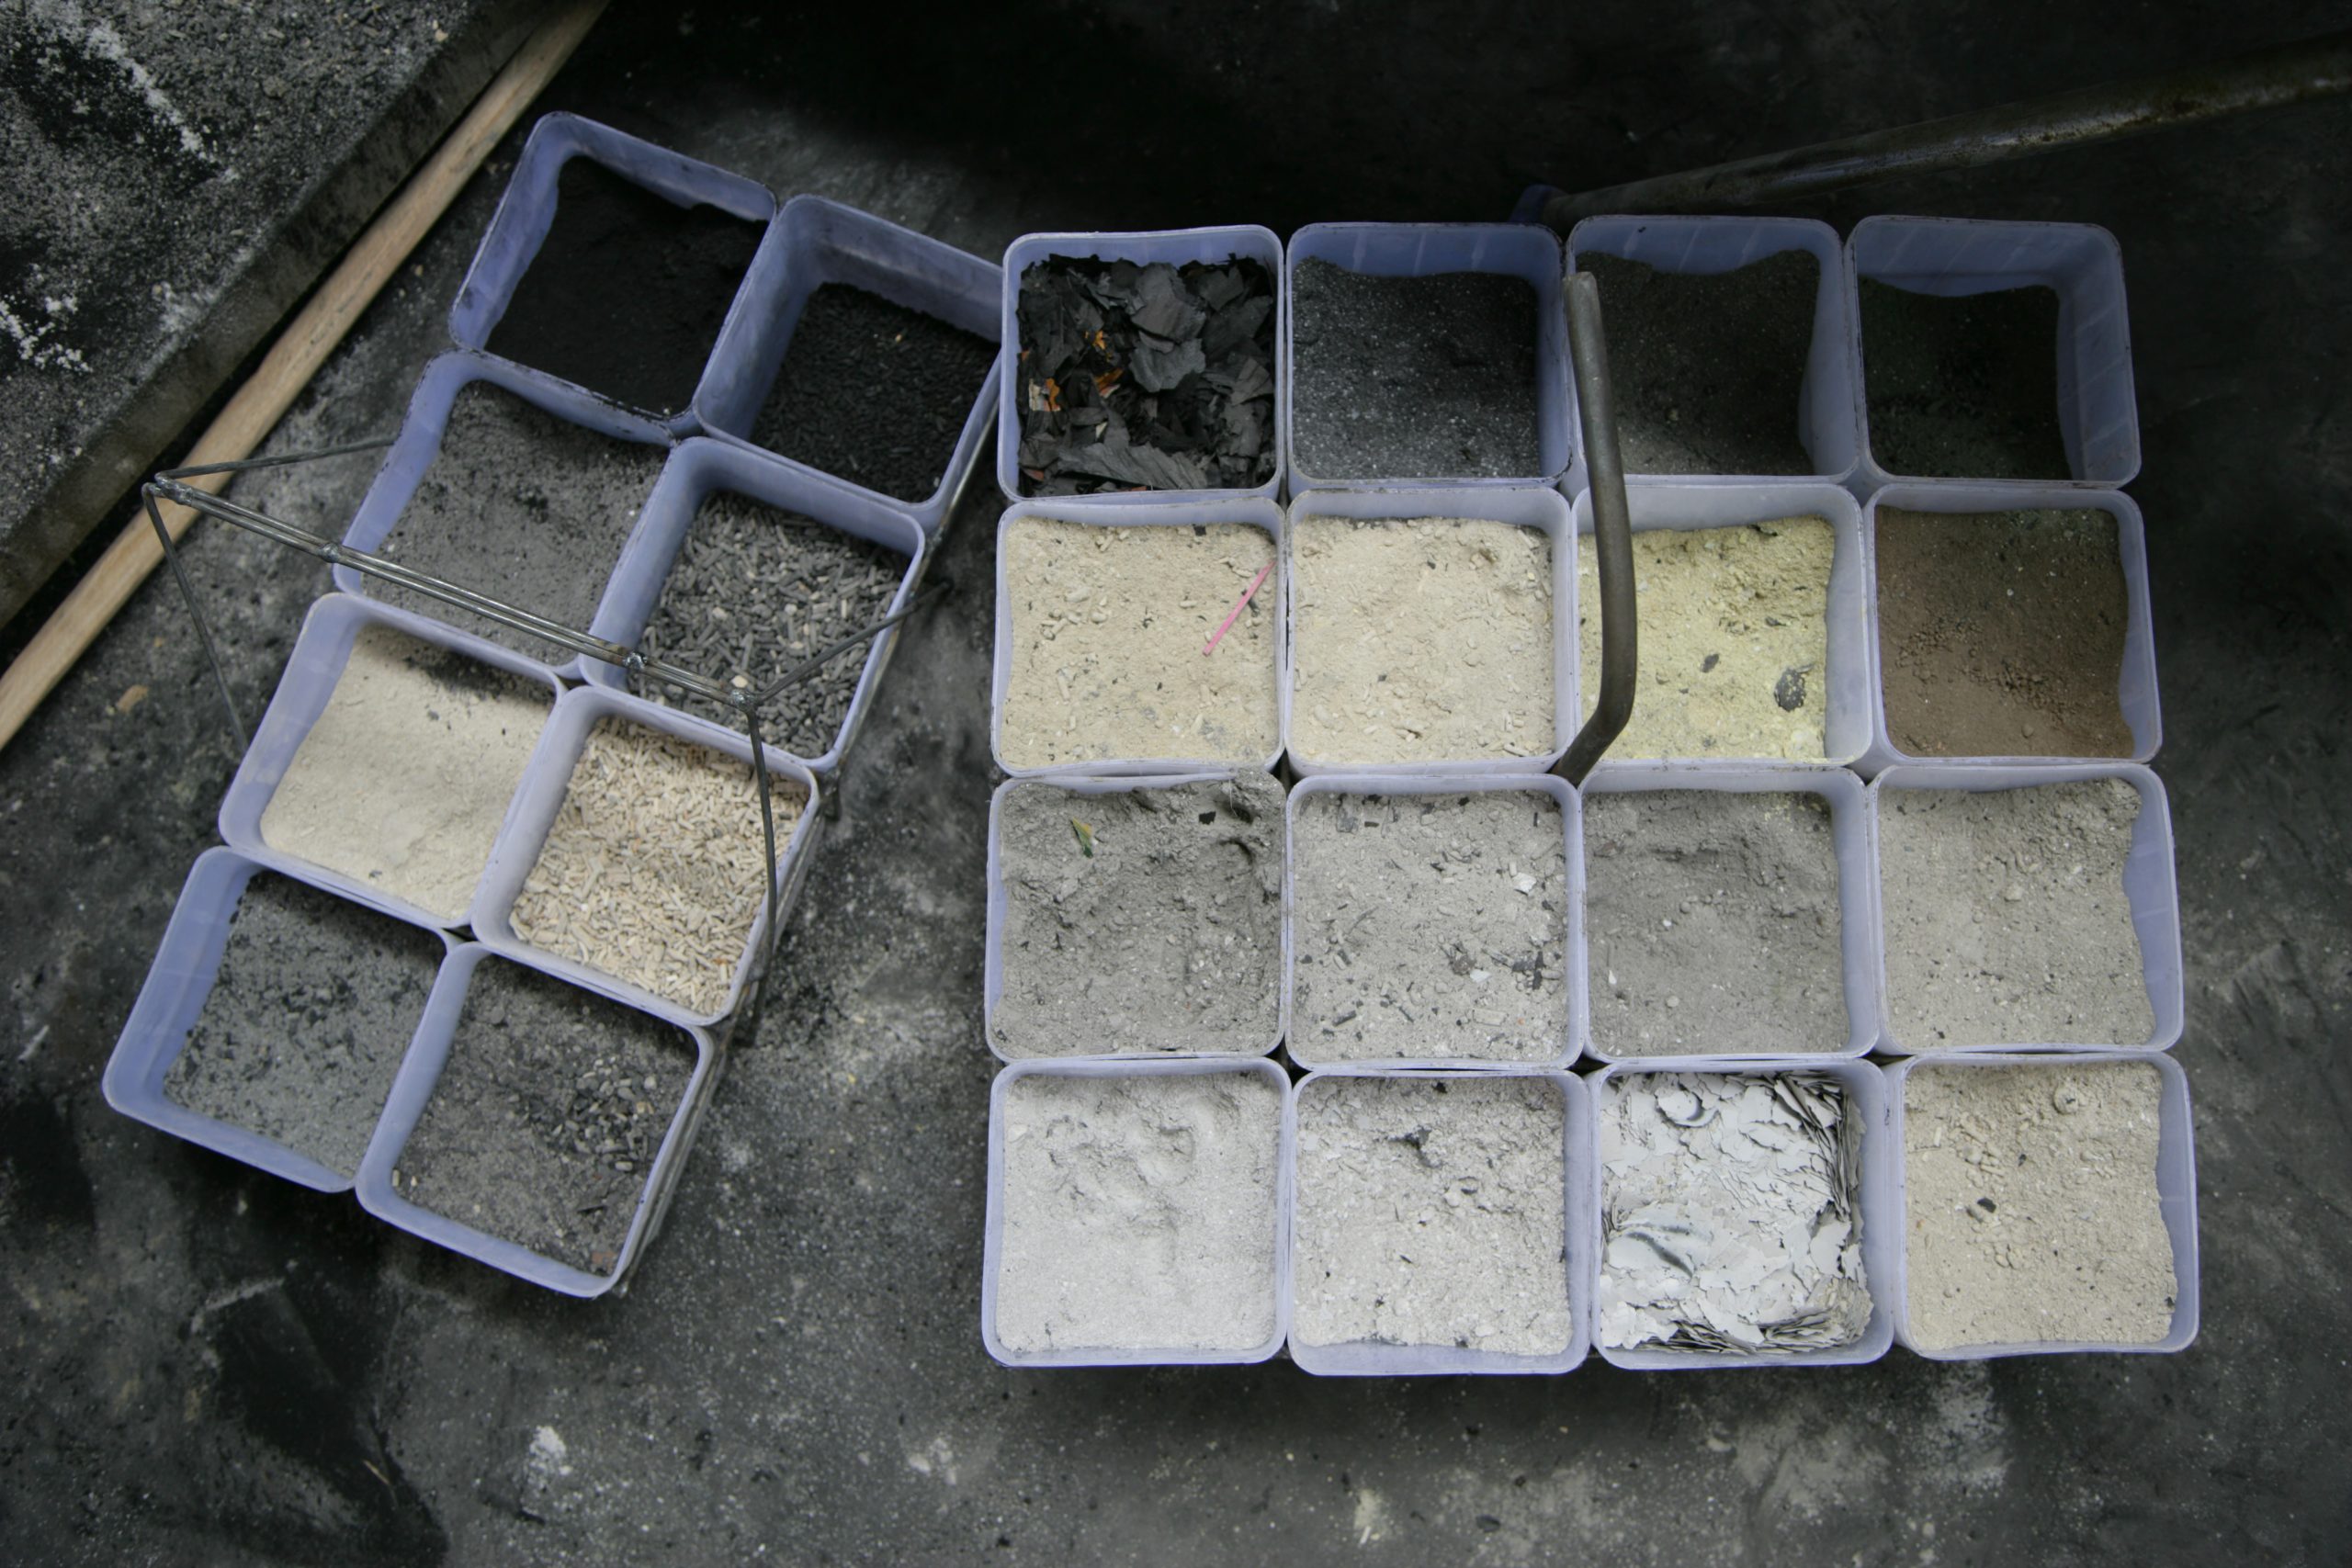 Pans of ash sorted by shade. Photo courtesy of the artist and Pace Gallery.